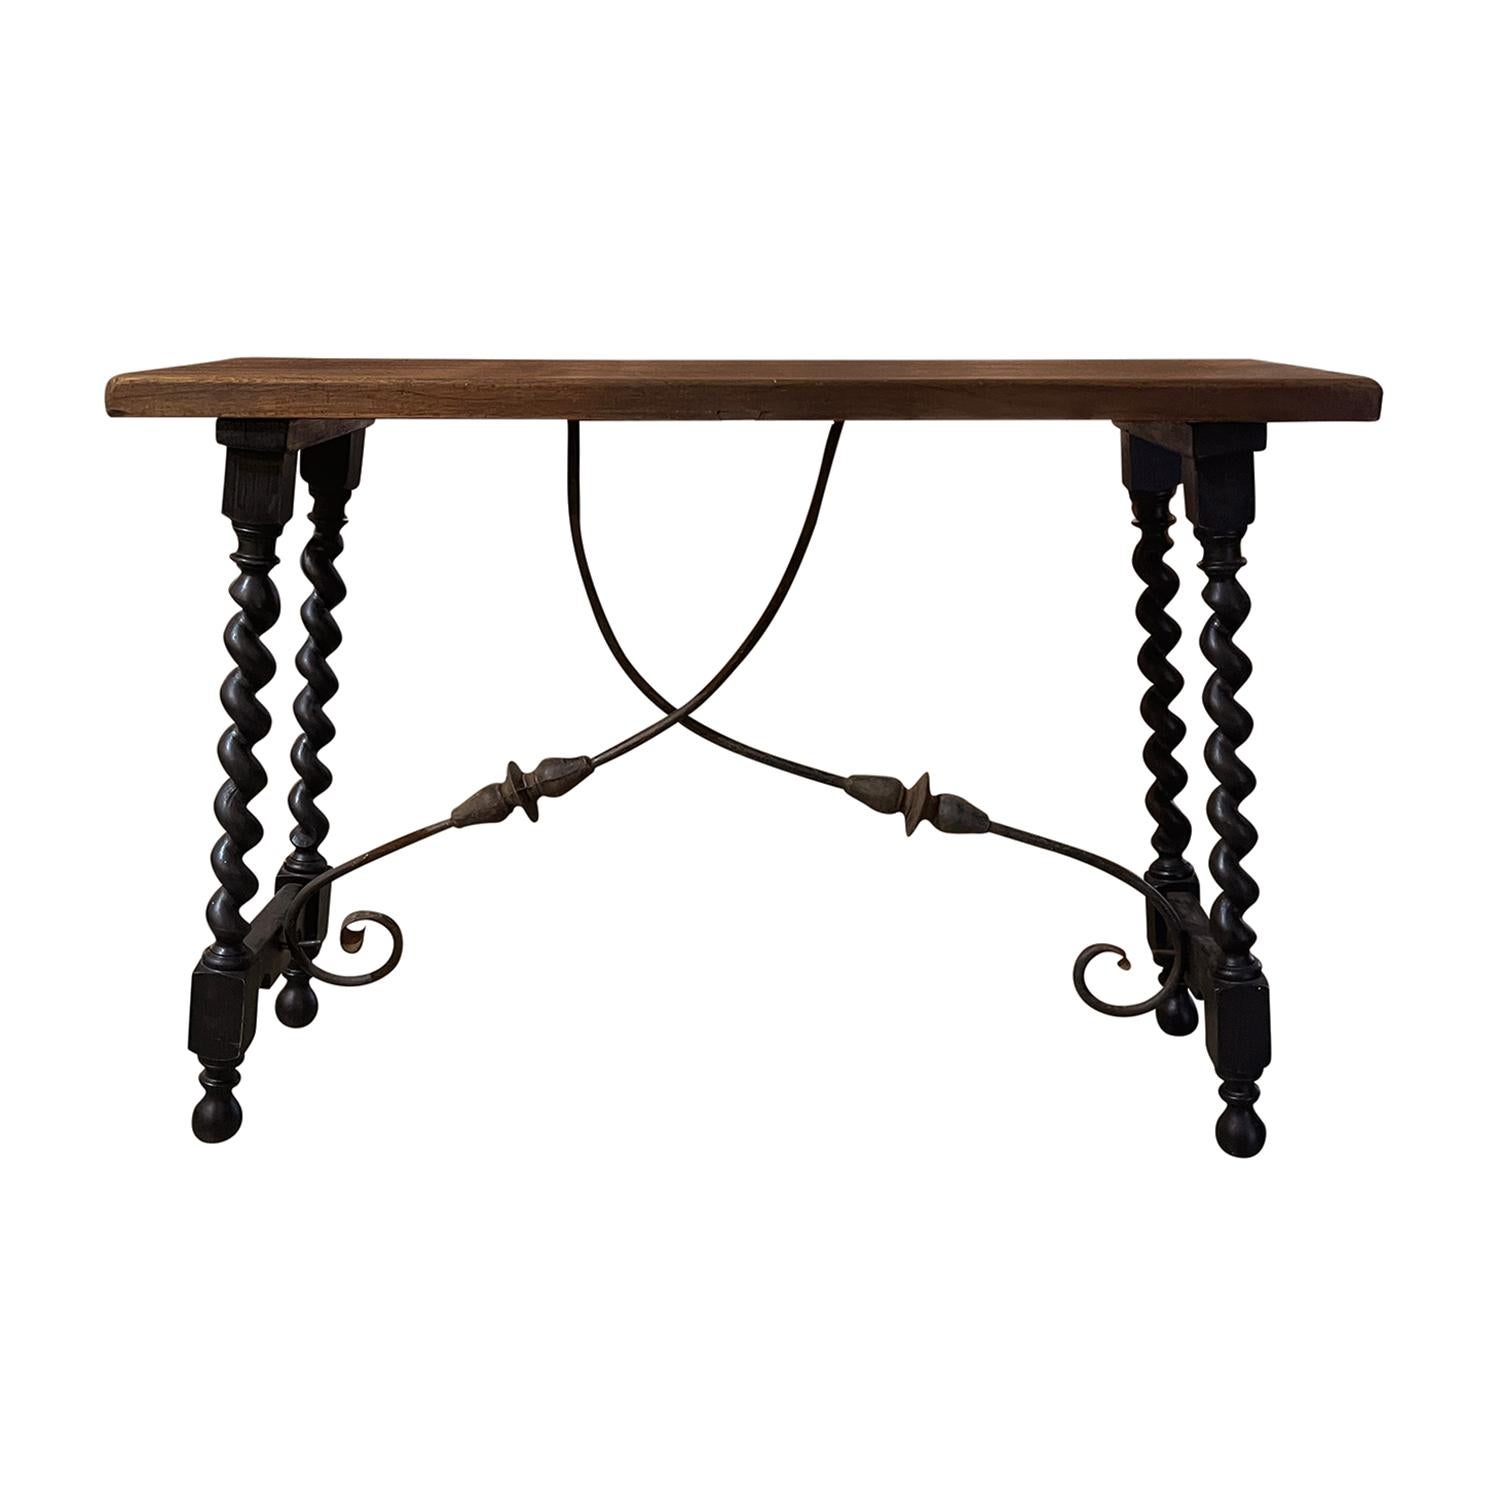 An antique 19th century Tuscan Renaissance style table or console topped with a warm and rich colored rectangular Walnut table top, in good condition. The table base has twisted hand turned legs in walnut refinished with dark wax. The wooden base is